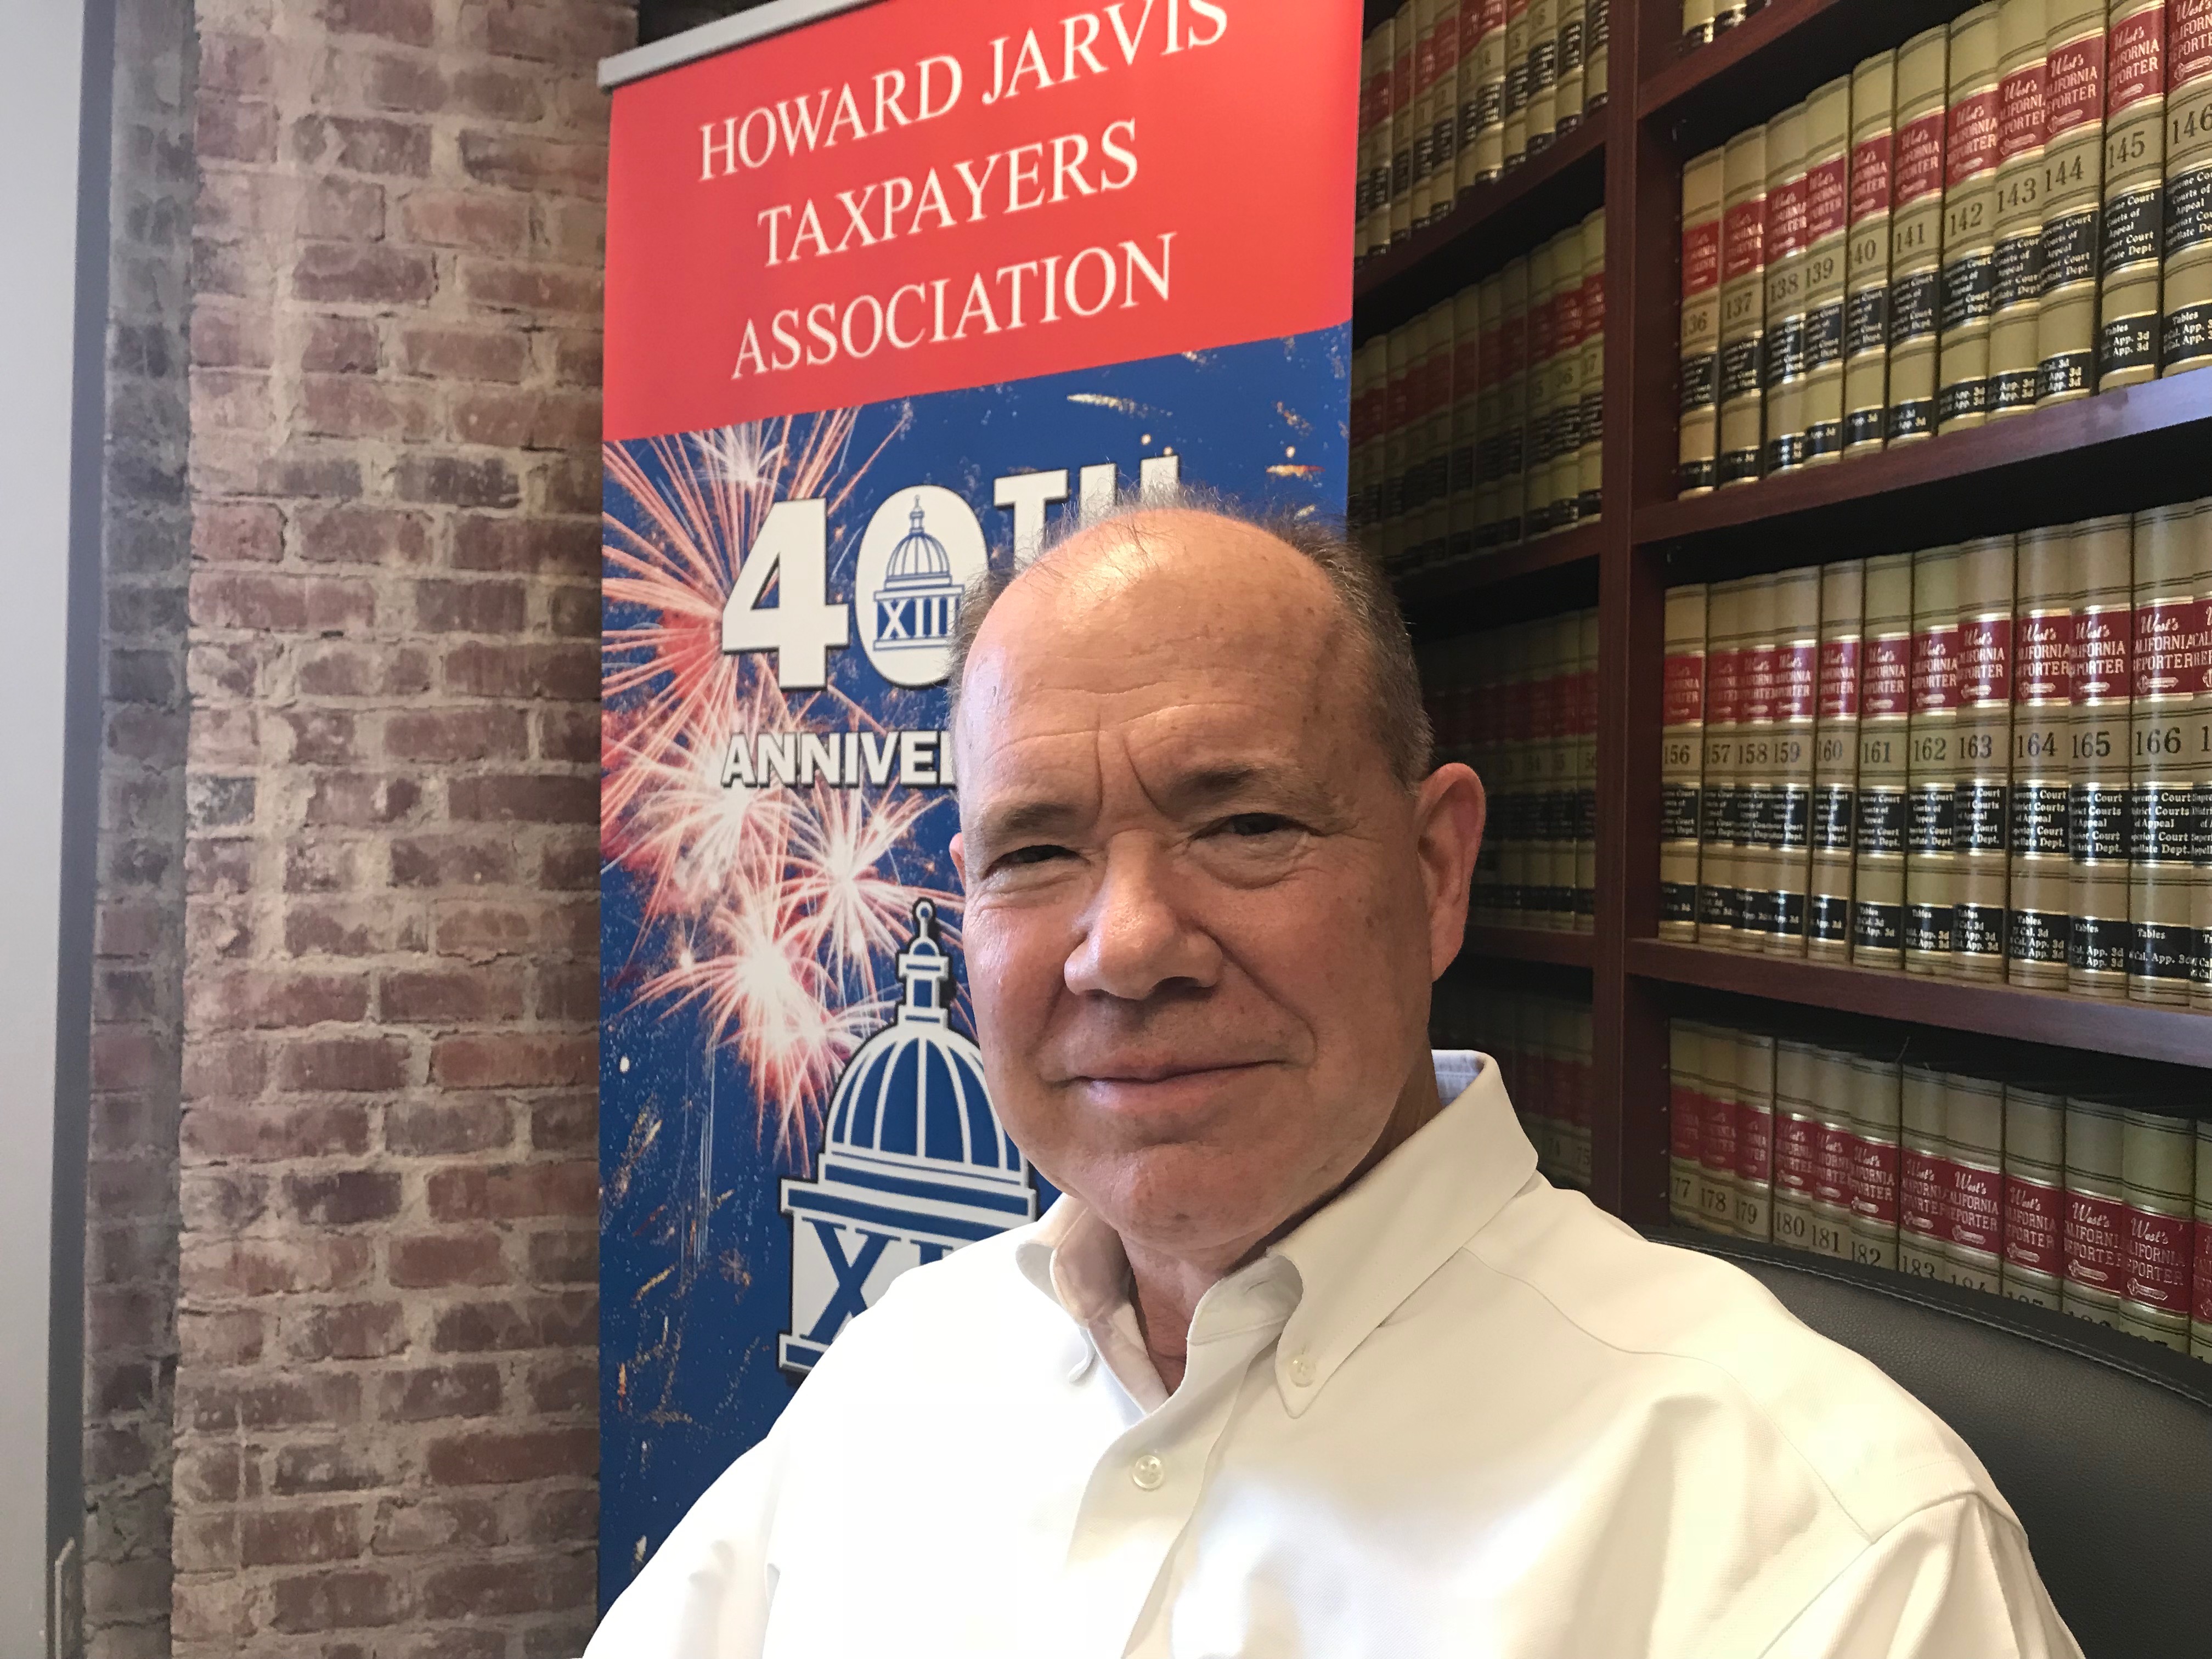 Jon Coupal is president of the Howard Jarvis Taxpayers Association.